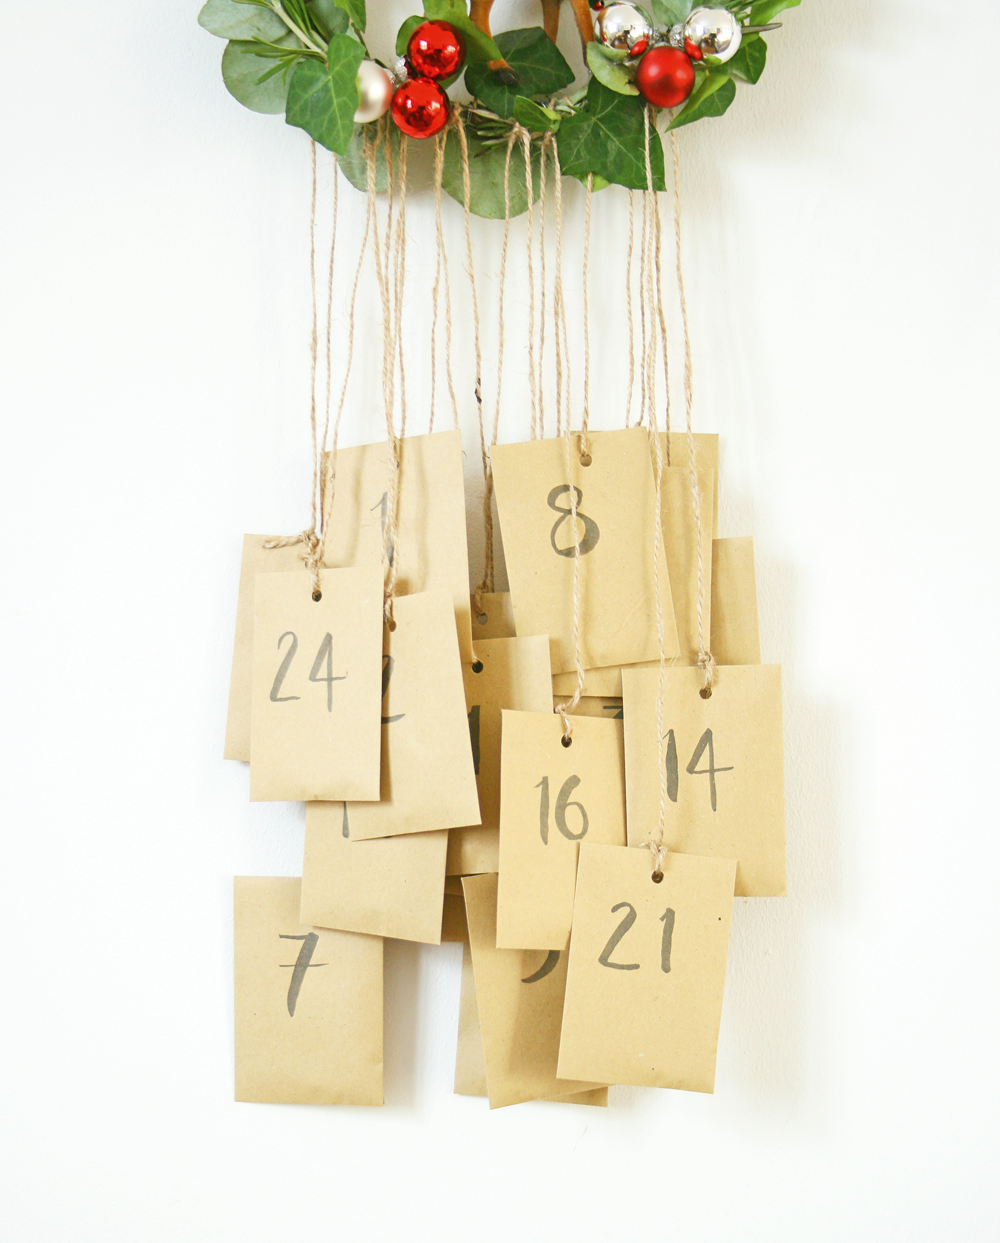  Carefully hang your advent calendar in its final position and let the countdown begin. 